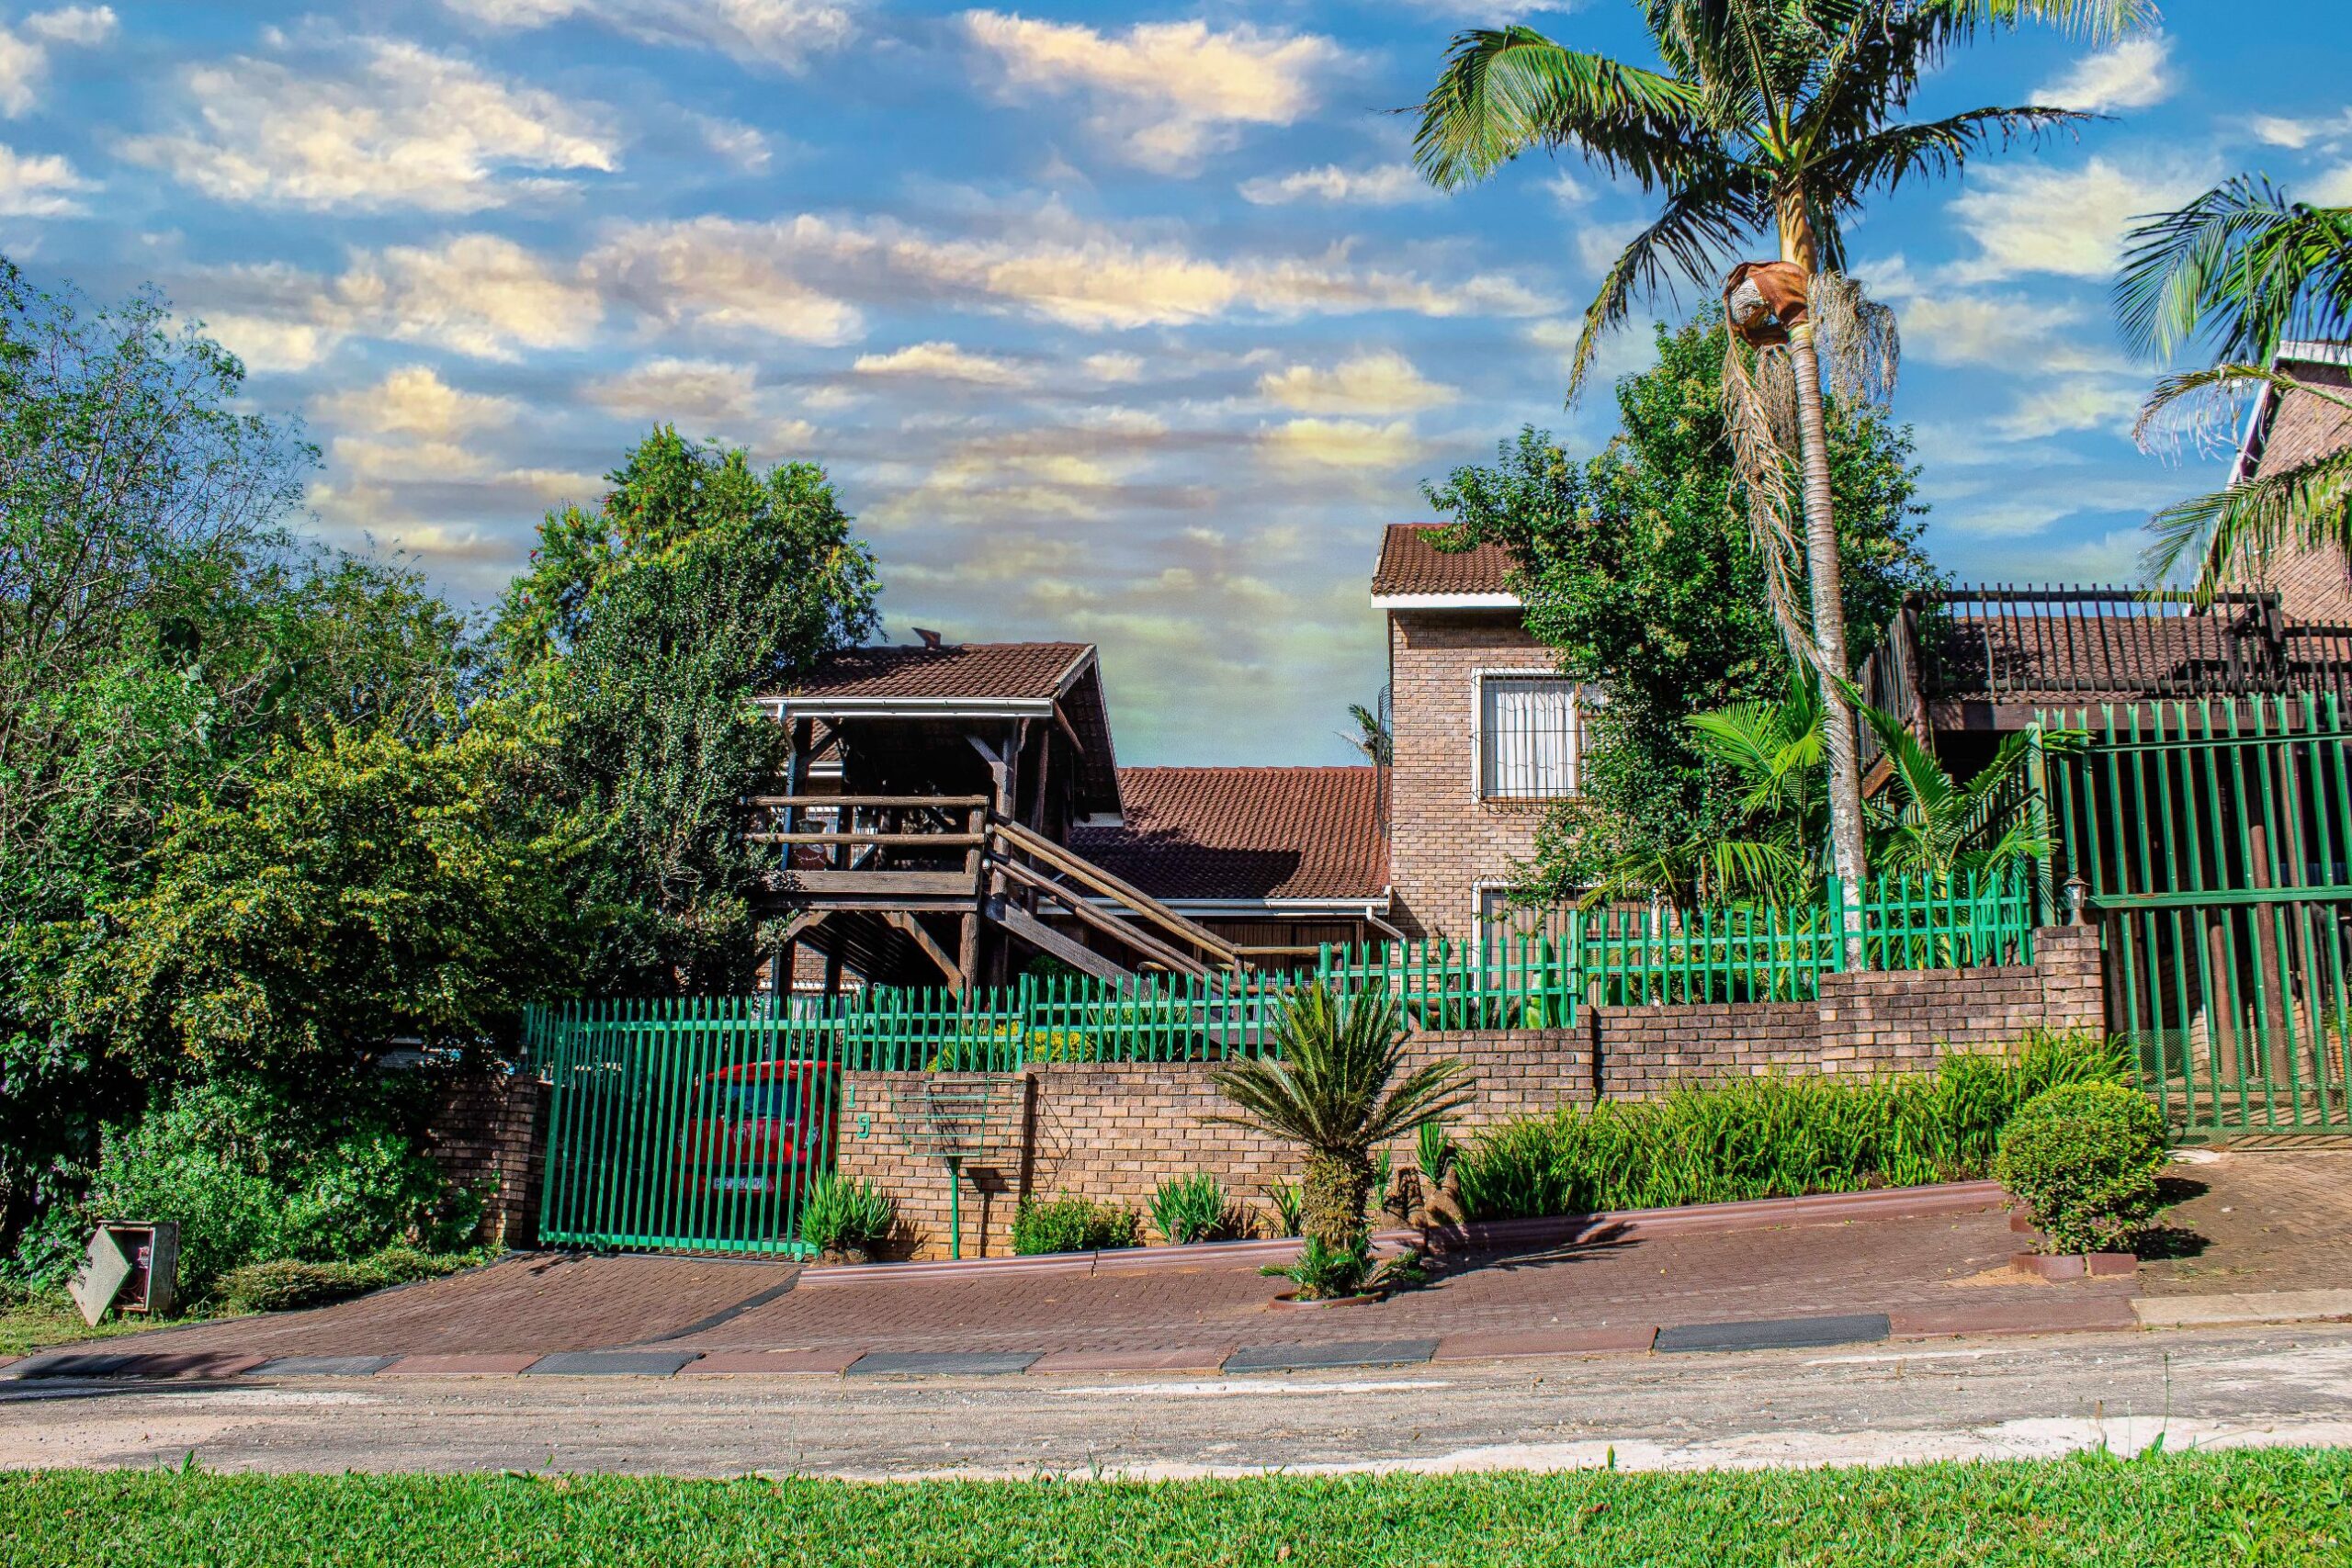 3 Bedrooms 2 Baths Spacious House For Sale in Sabie Ext 9.